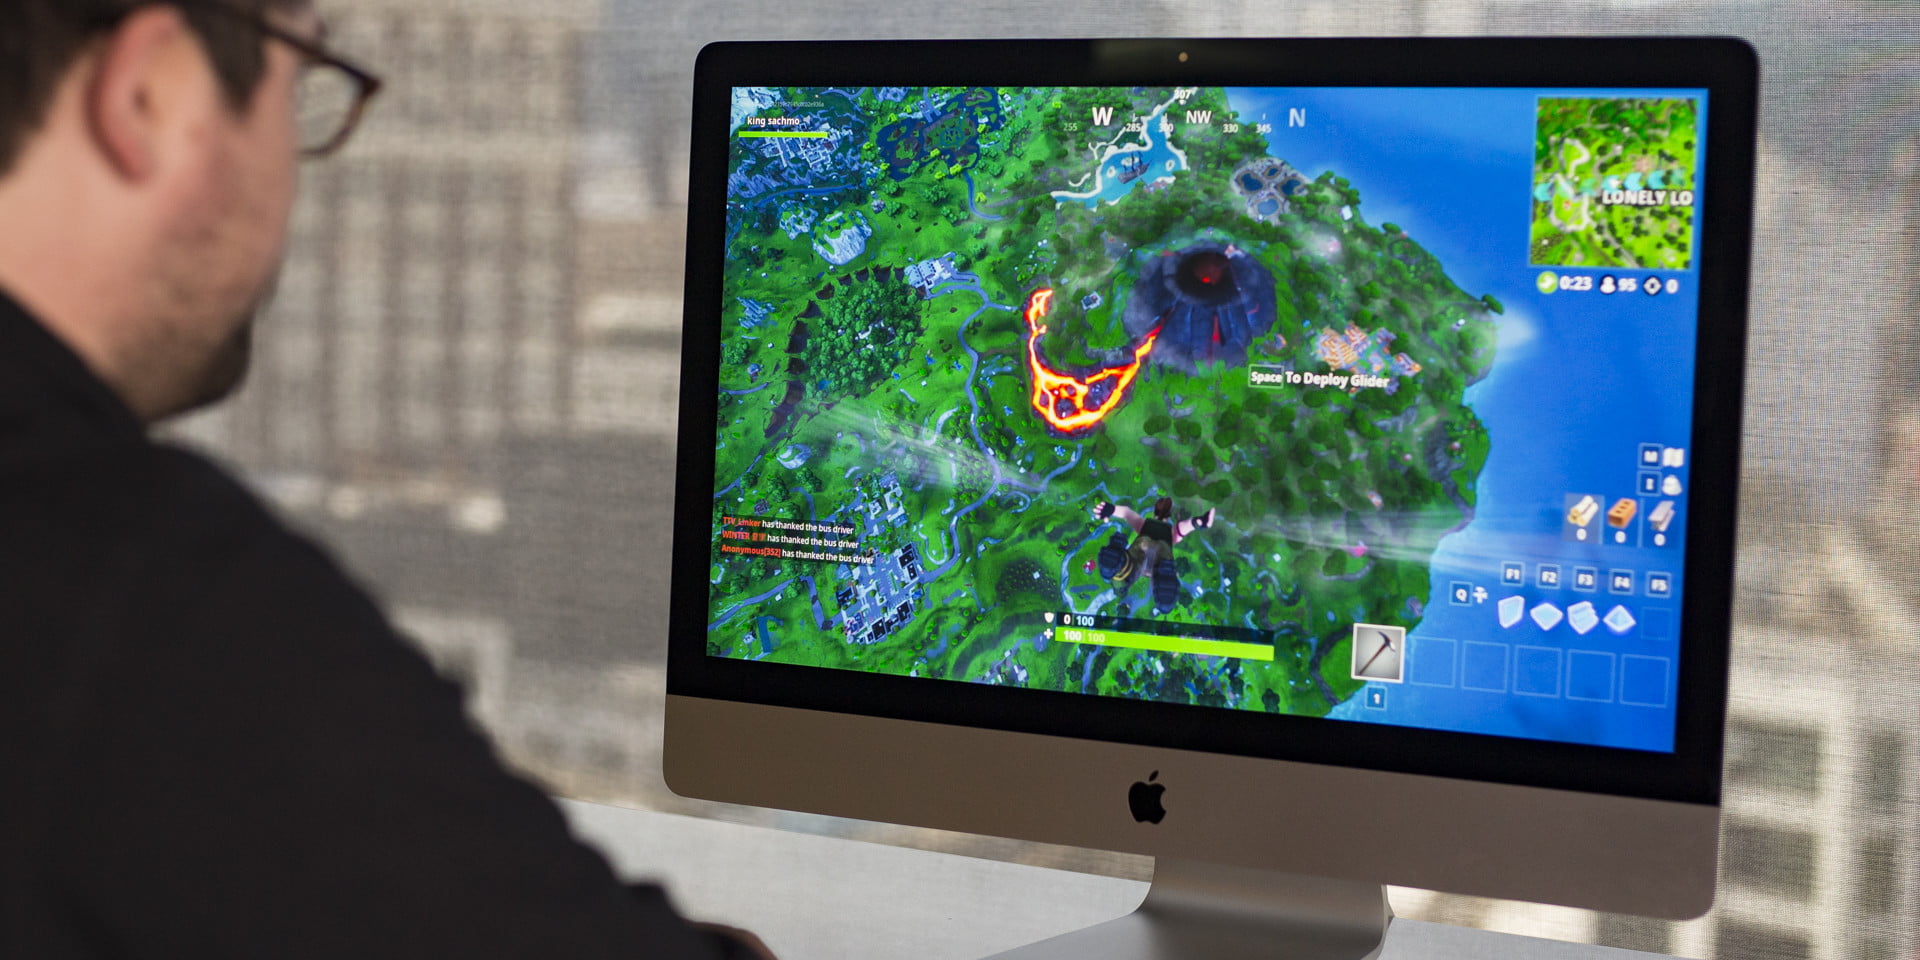 how to get fortnite on apple computer